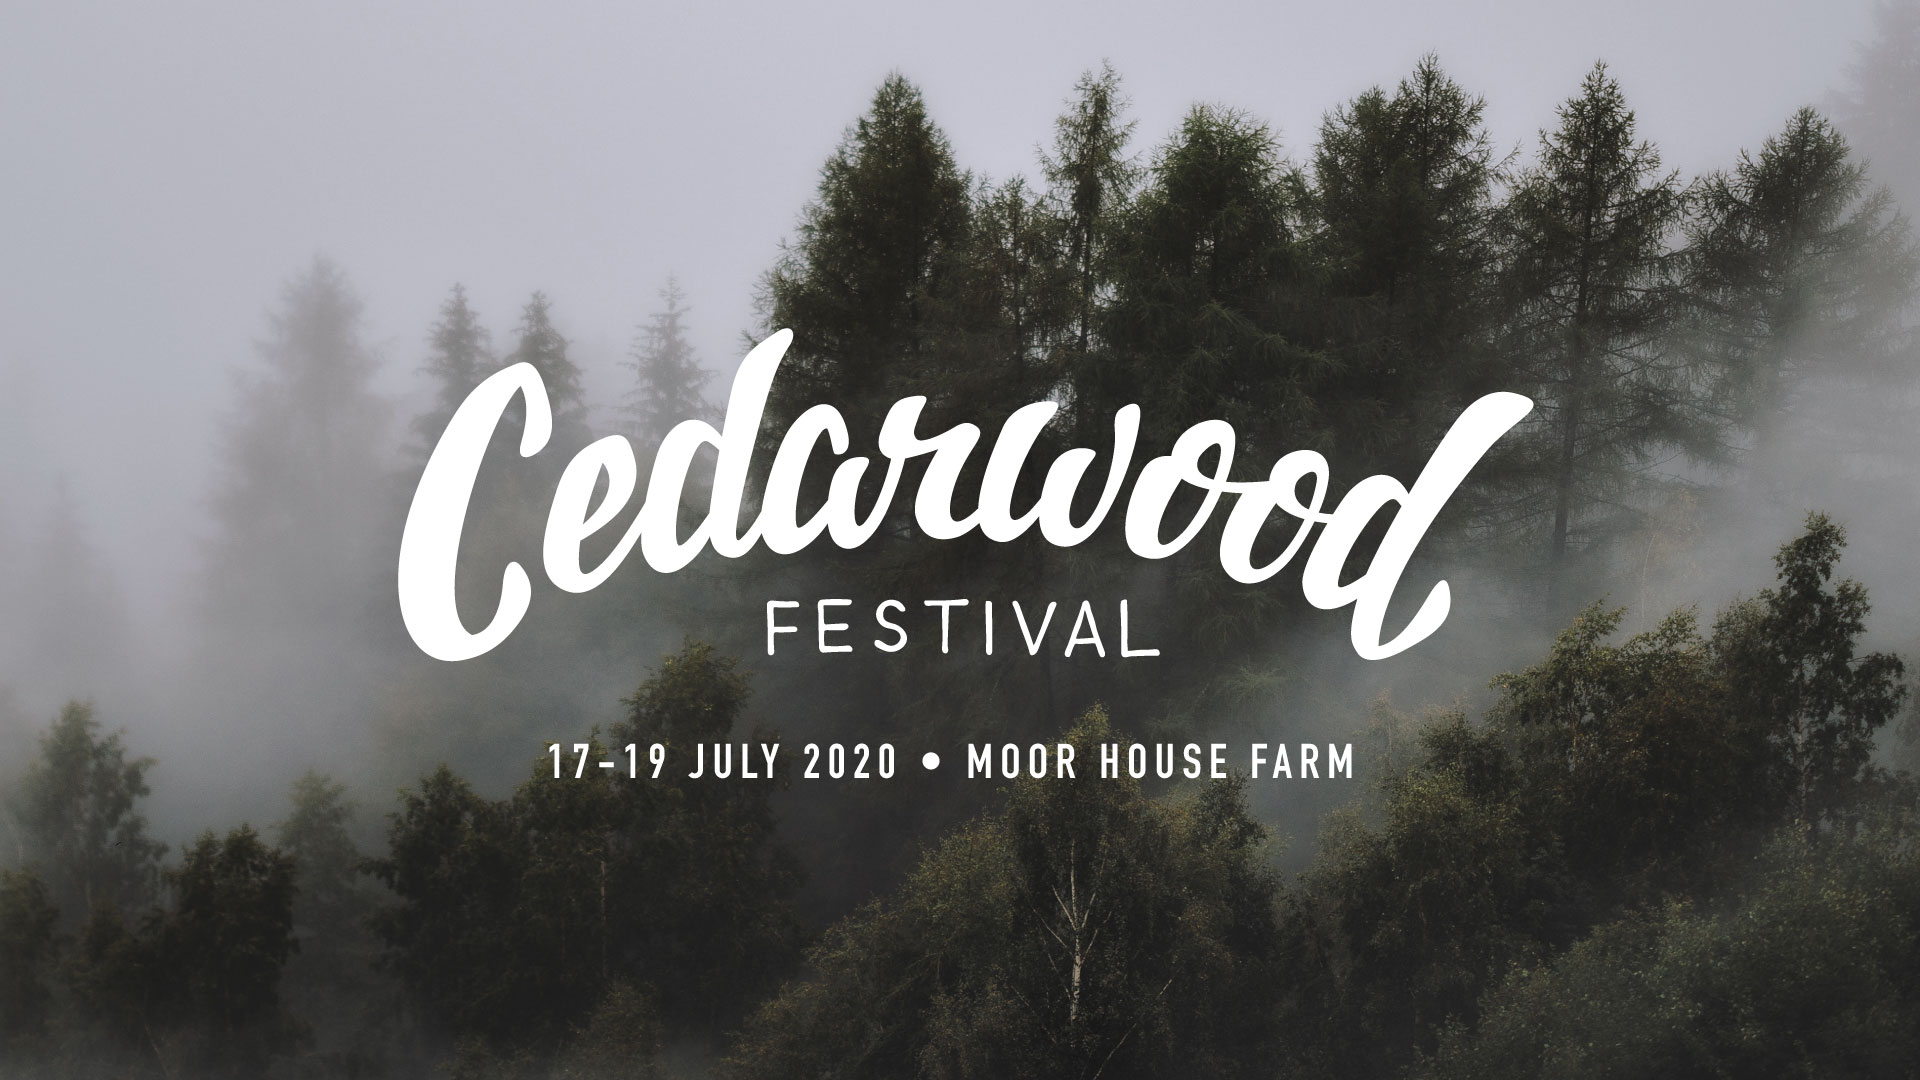 Philippa Hanna Among Artists Appearing at Cedarwood Festival In County Durham